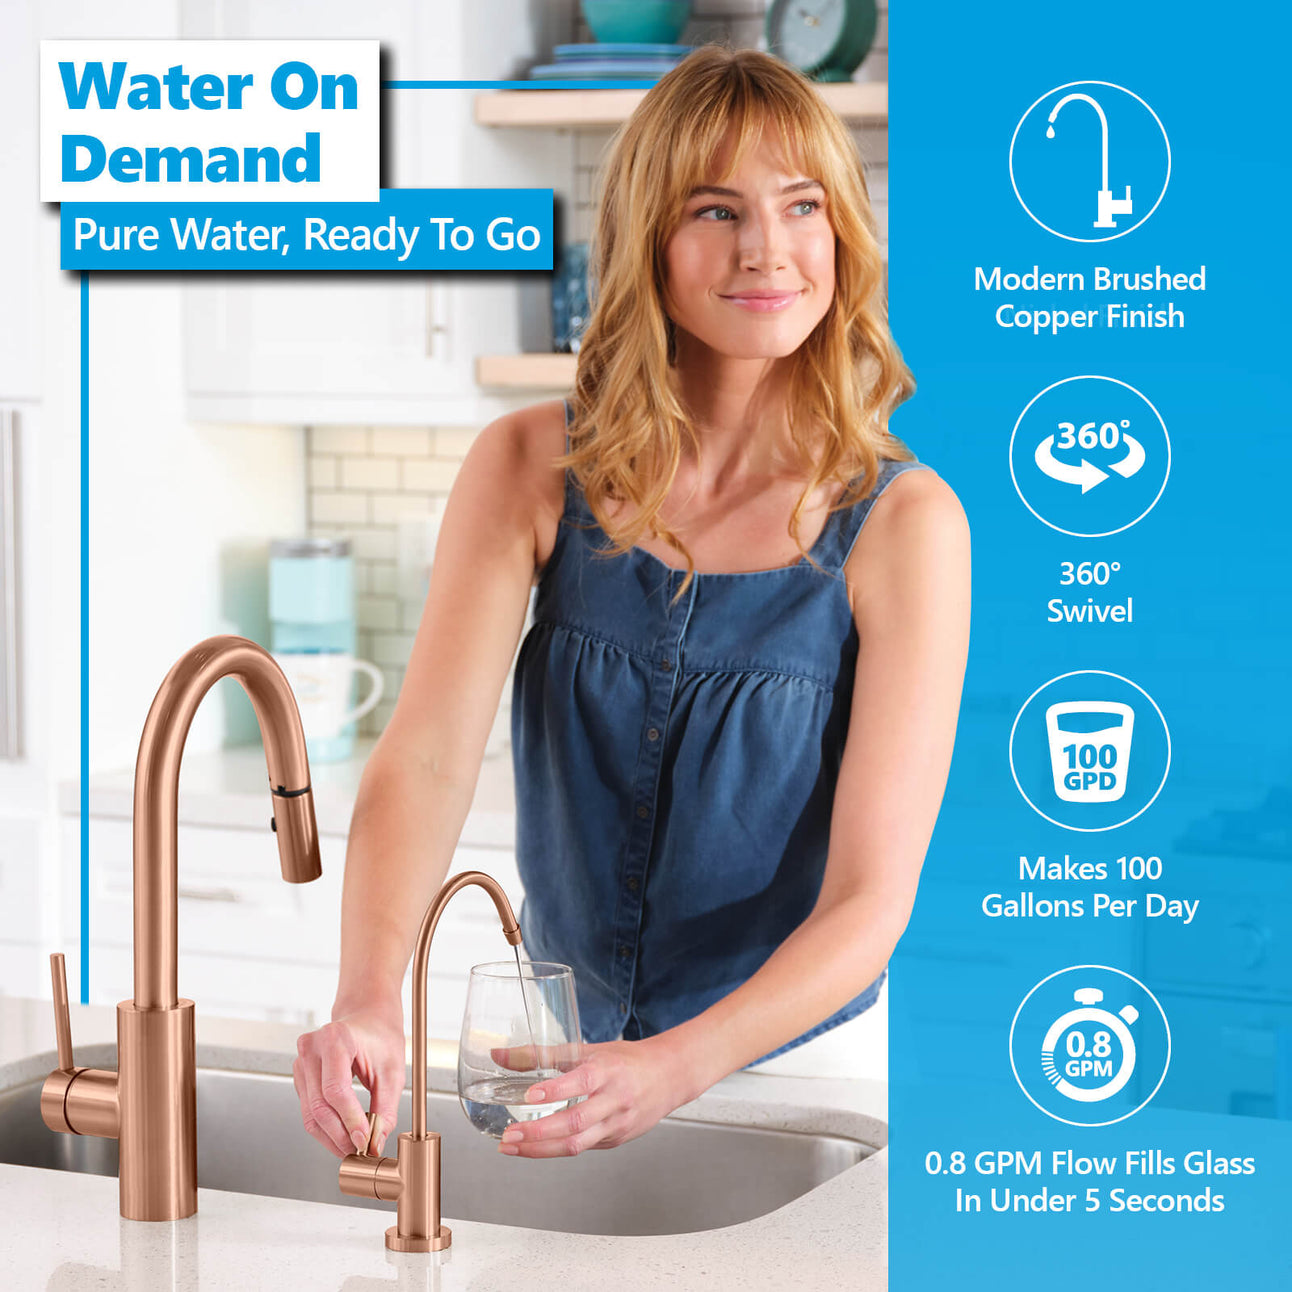 Alkaline RO System with modern brushed copper faucet